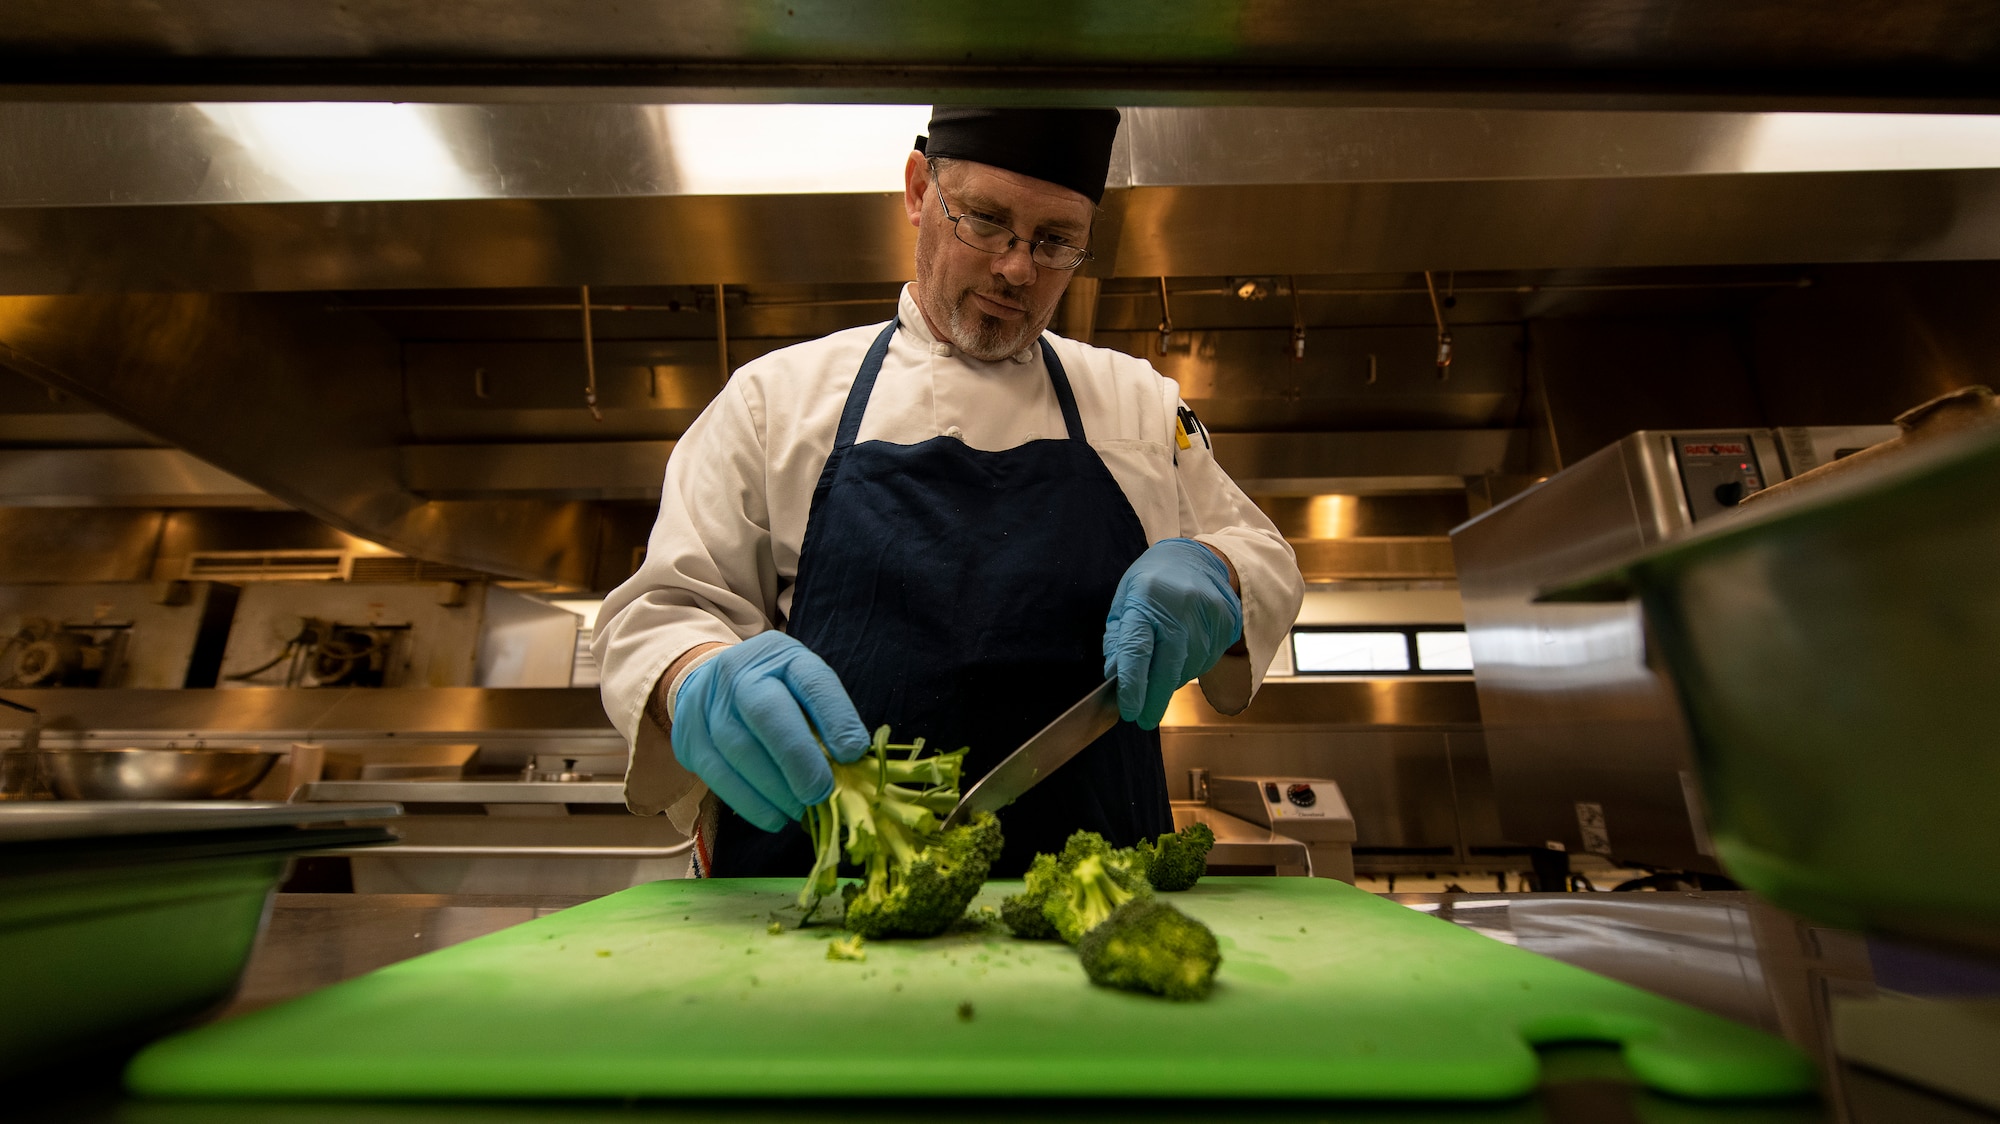 Gerald Whitehead, a cook from the Hangar 97 Dining Facility, prepares food, Jan. 10, 2019 at Altus Air Force Base, Okla.